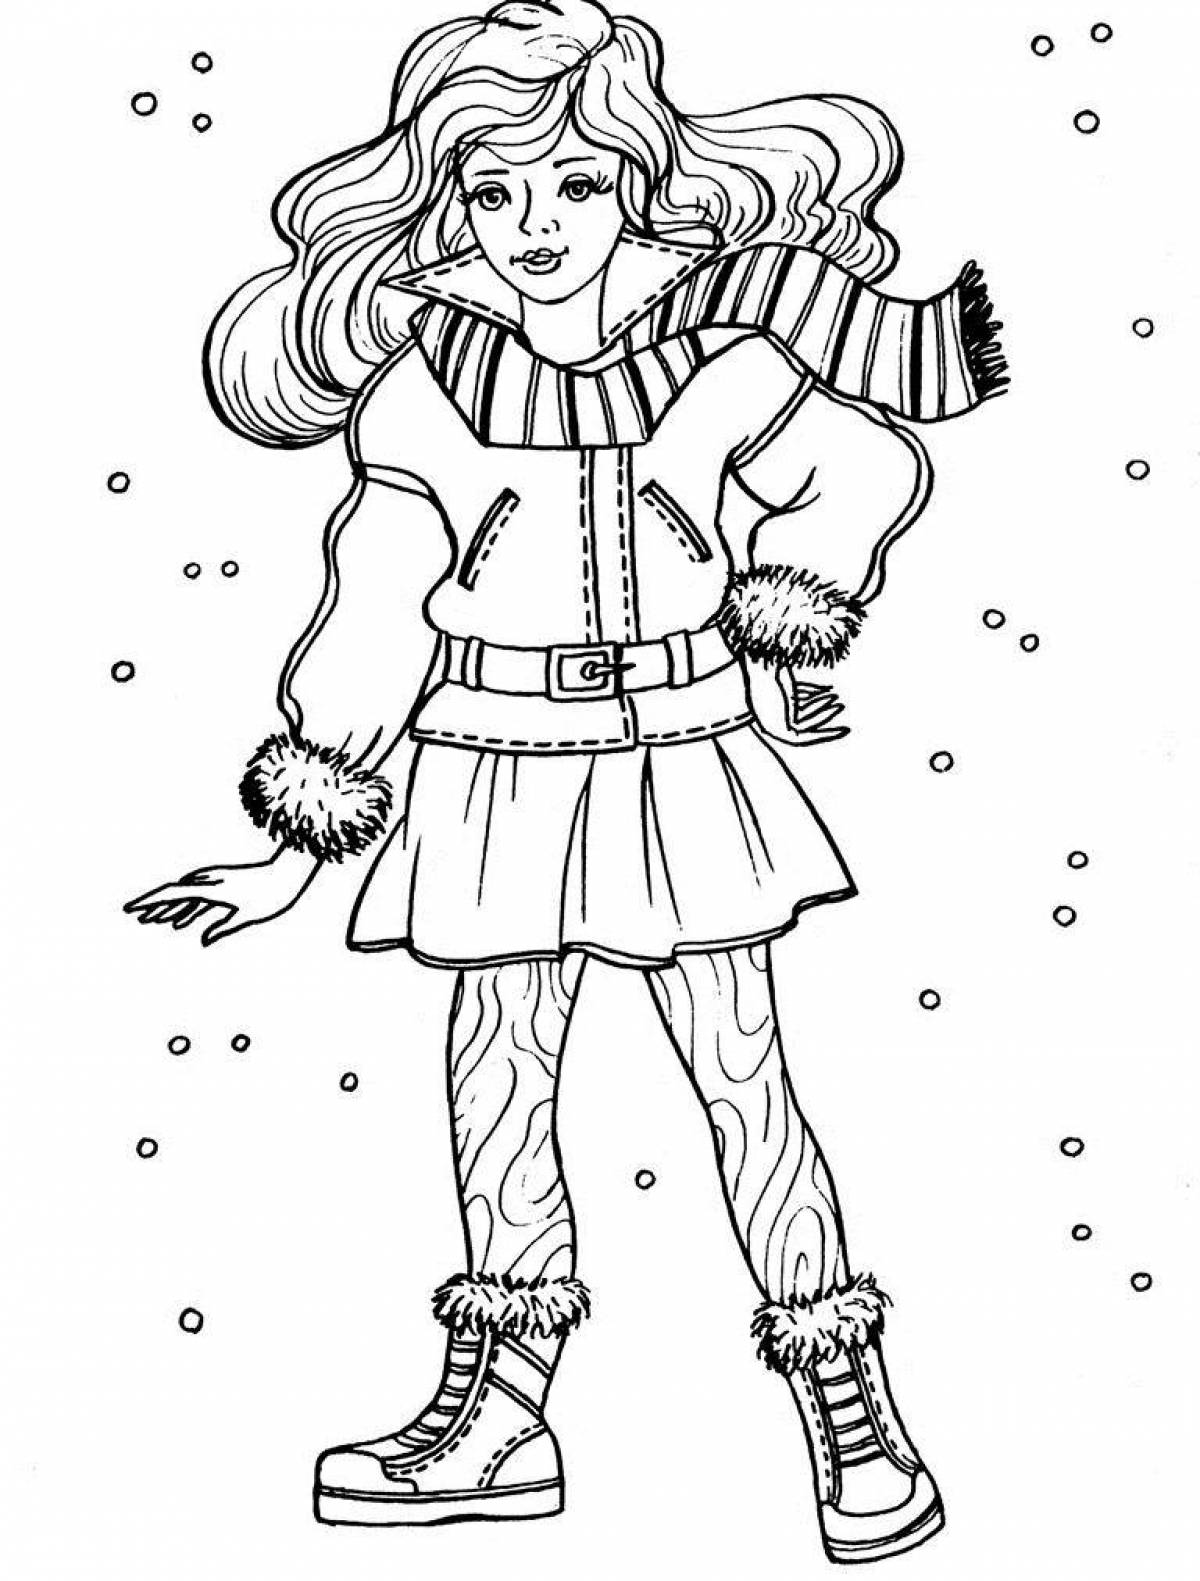 Coloring pages for girls winter